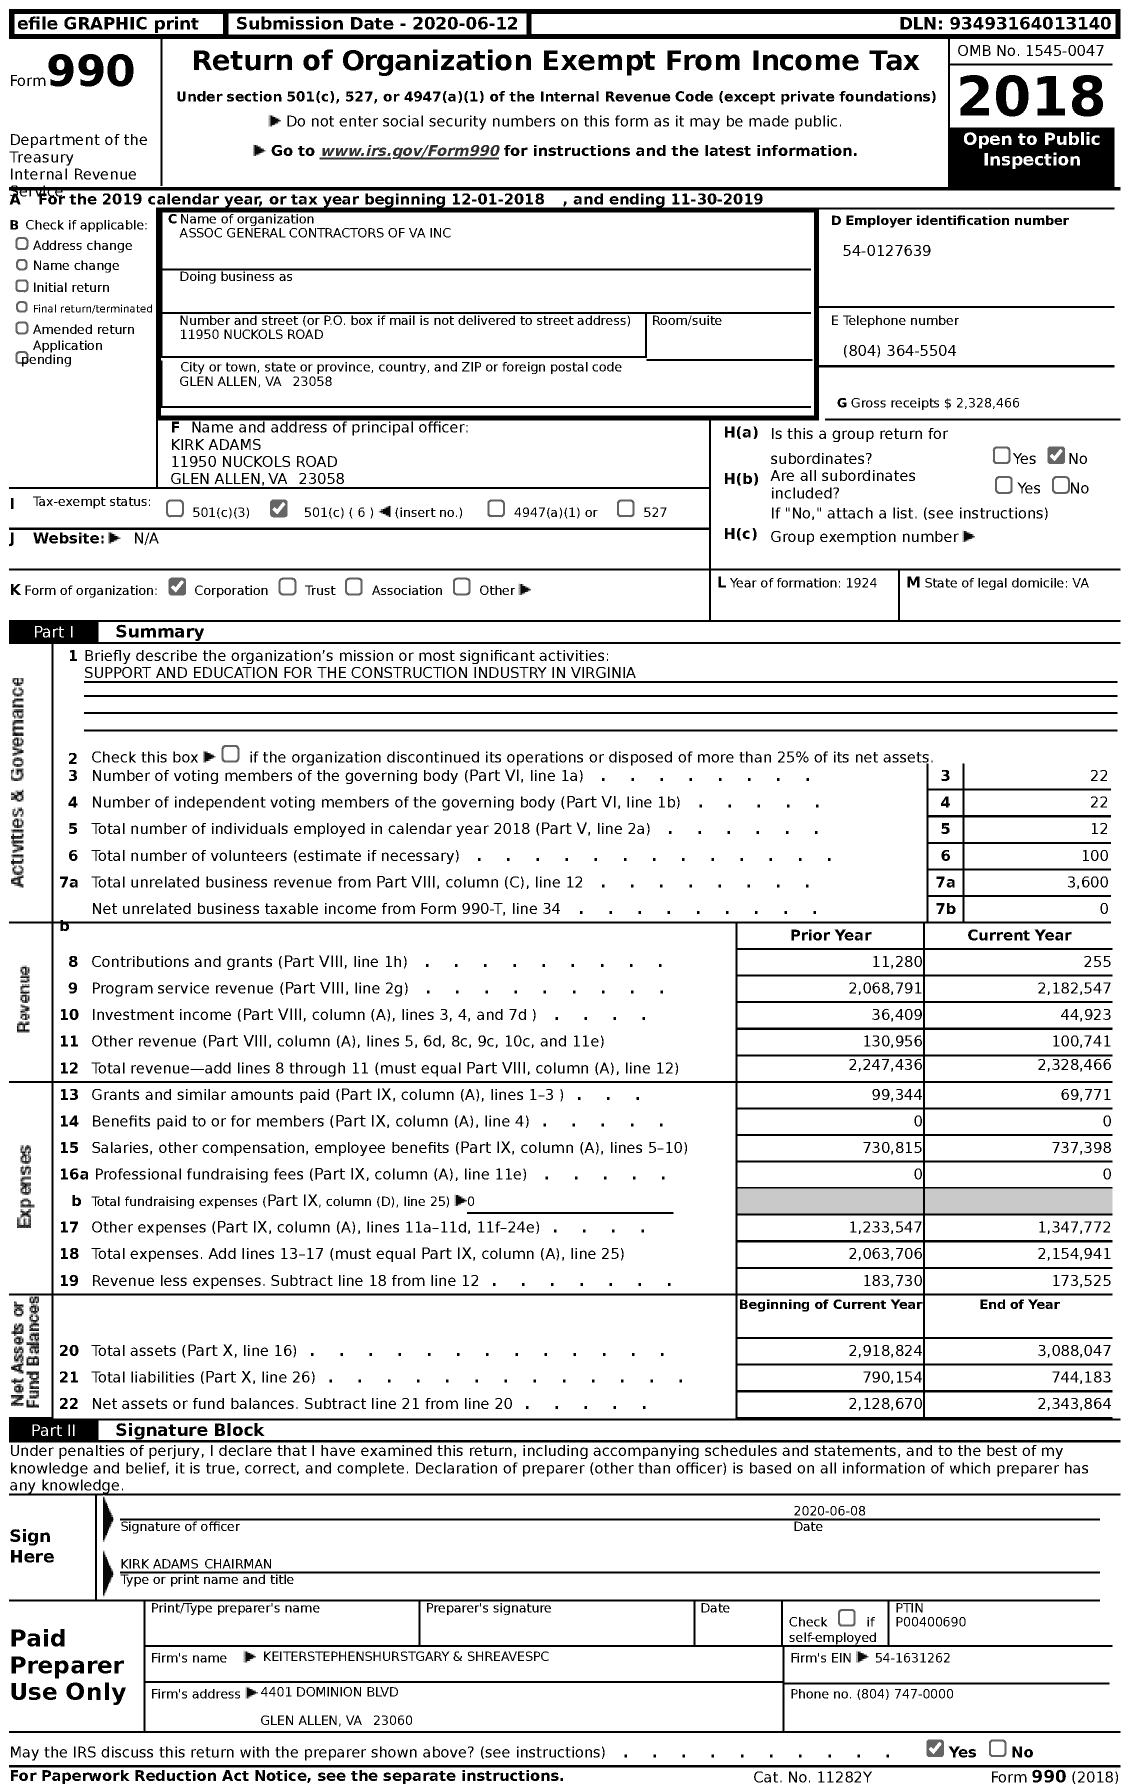 Image of first page of 2018 Form 990 for Association General Contractors of Va (AGC)